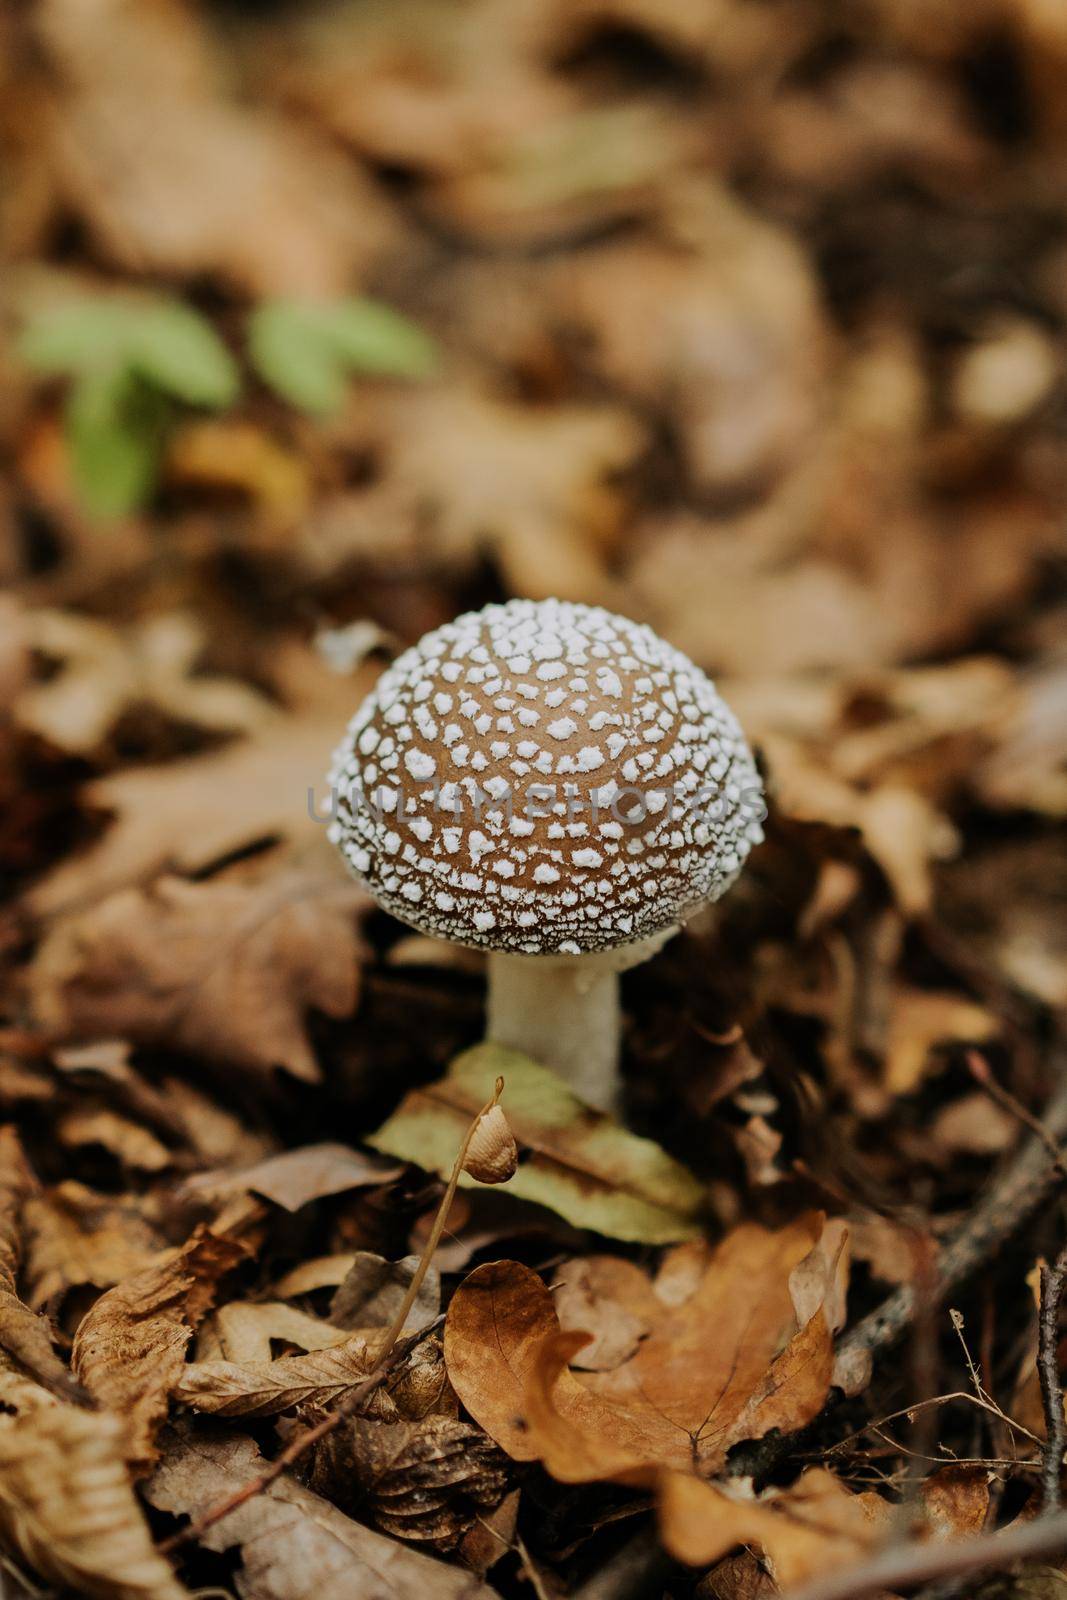 Small fungus amanita in fallen leaves in autumn. Popular fly agaric mushroom in natural forest habitat. . High quality photo